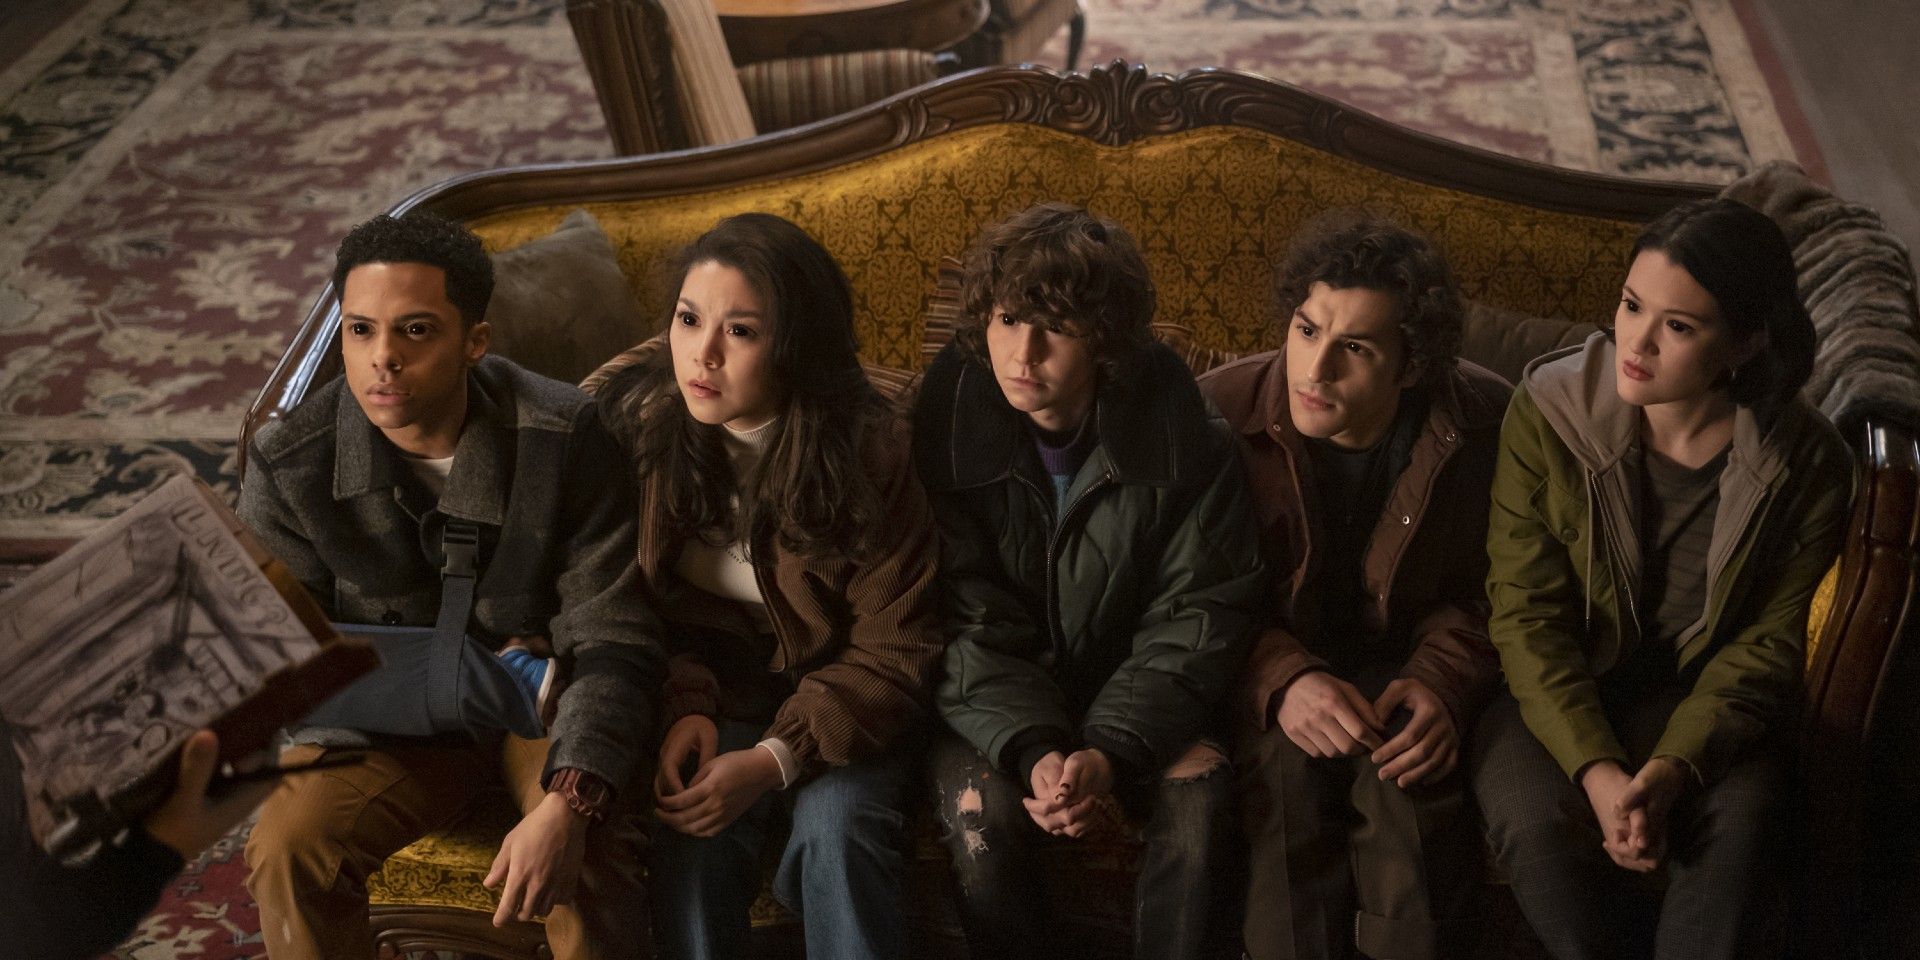 Zack Morris, Ana Yi Puig, Miles McKenna, Will Price, and Isa Briones in Goosebumps